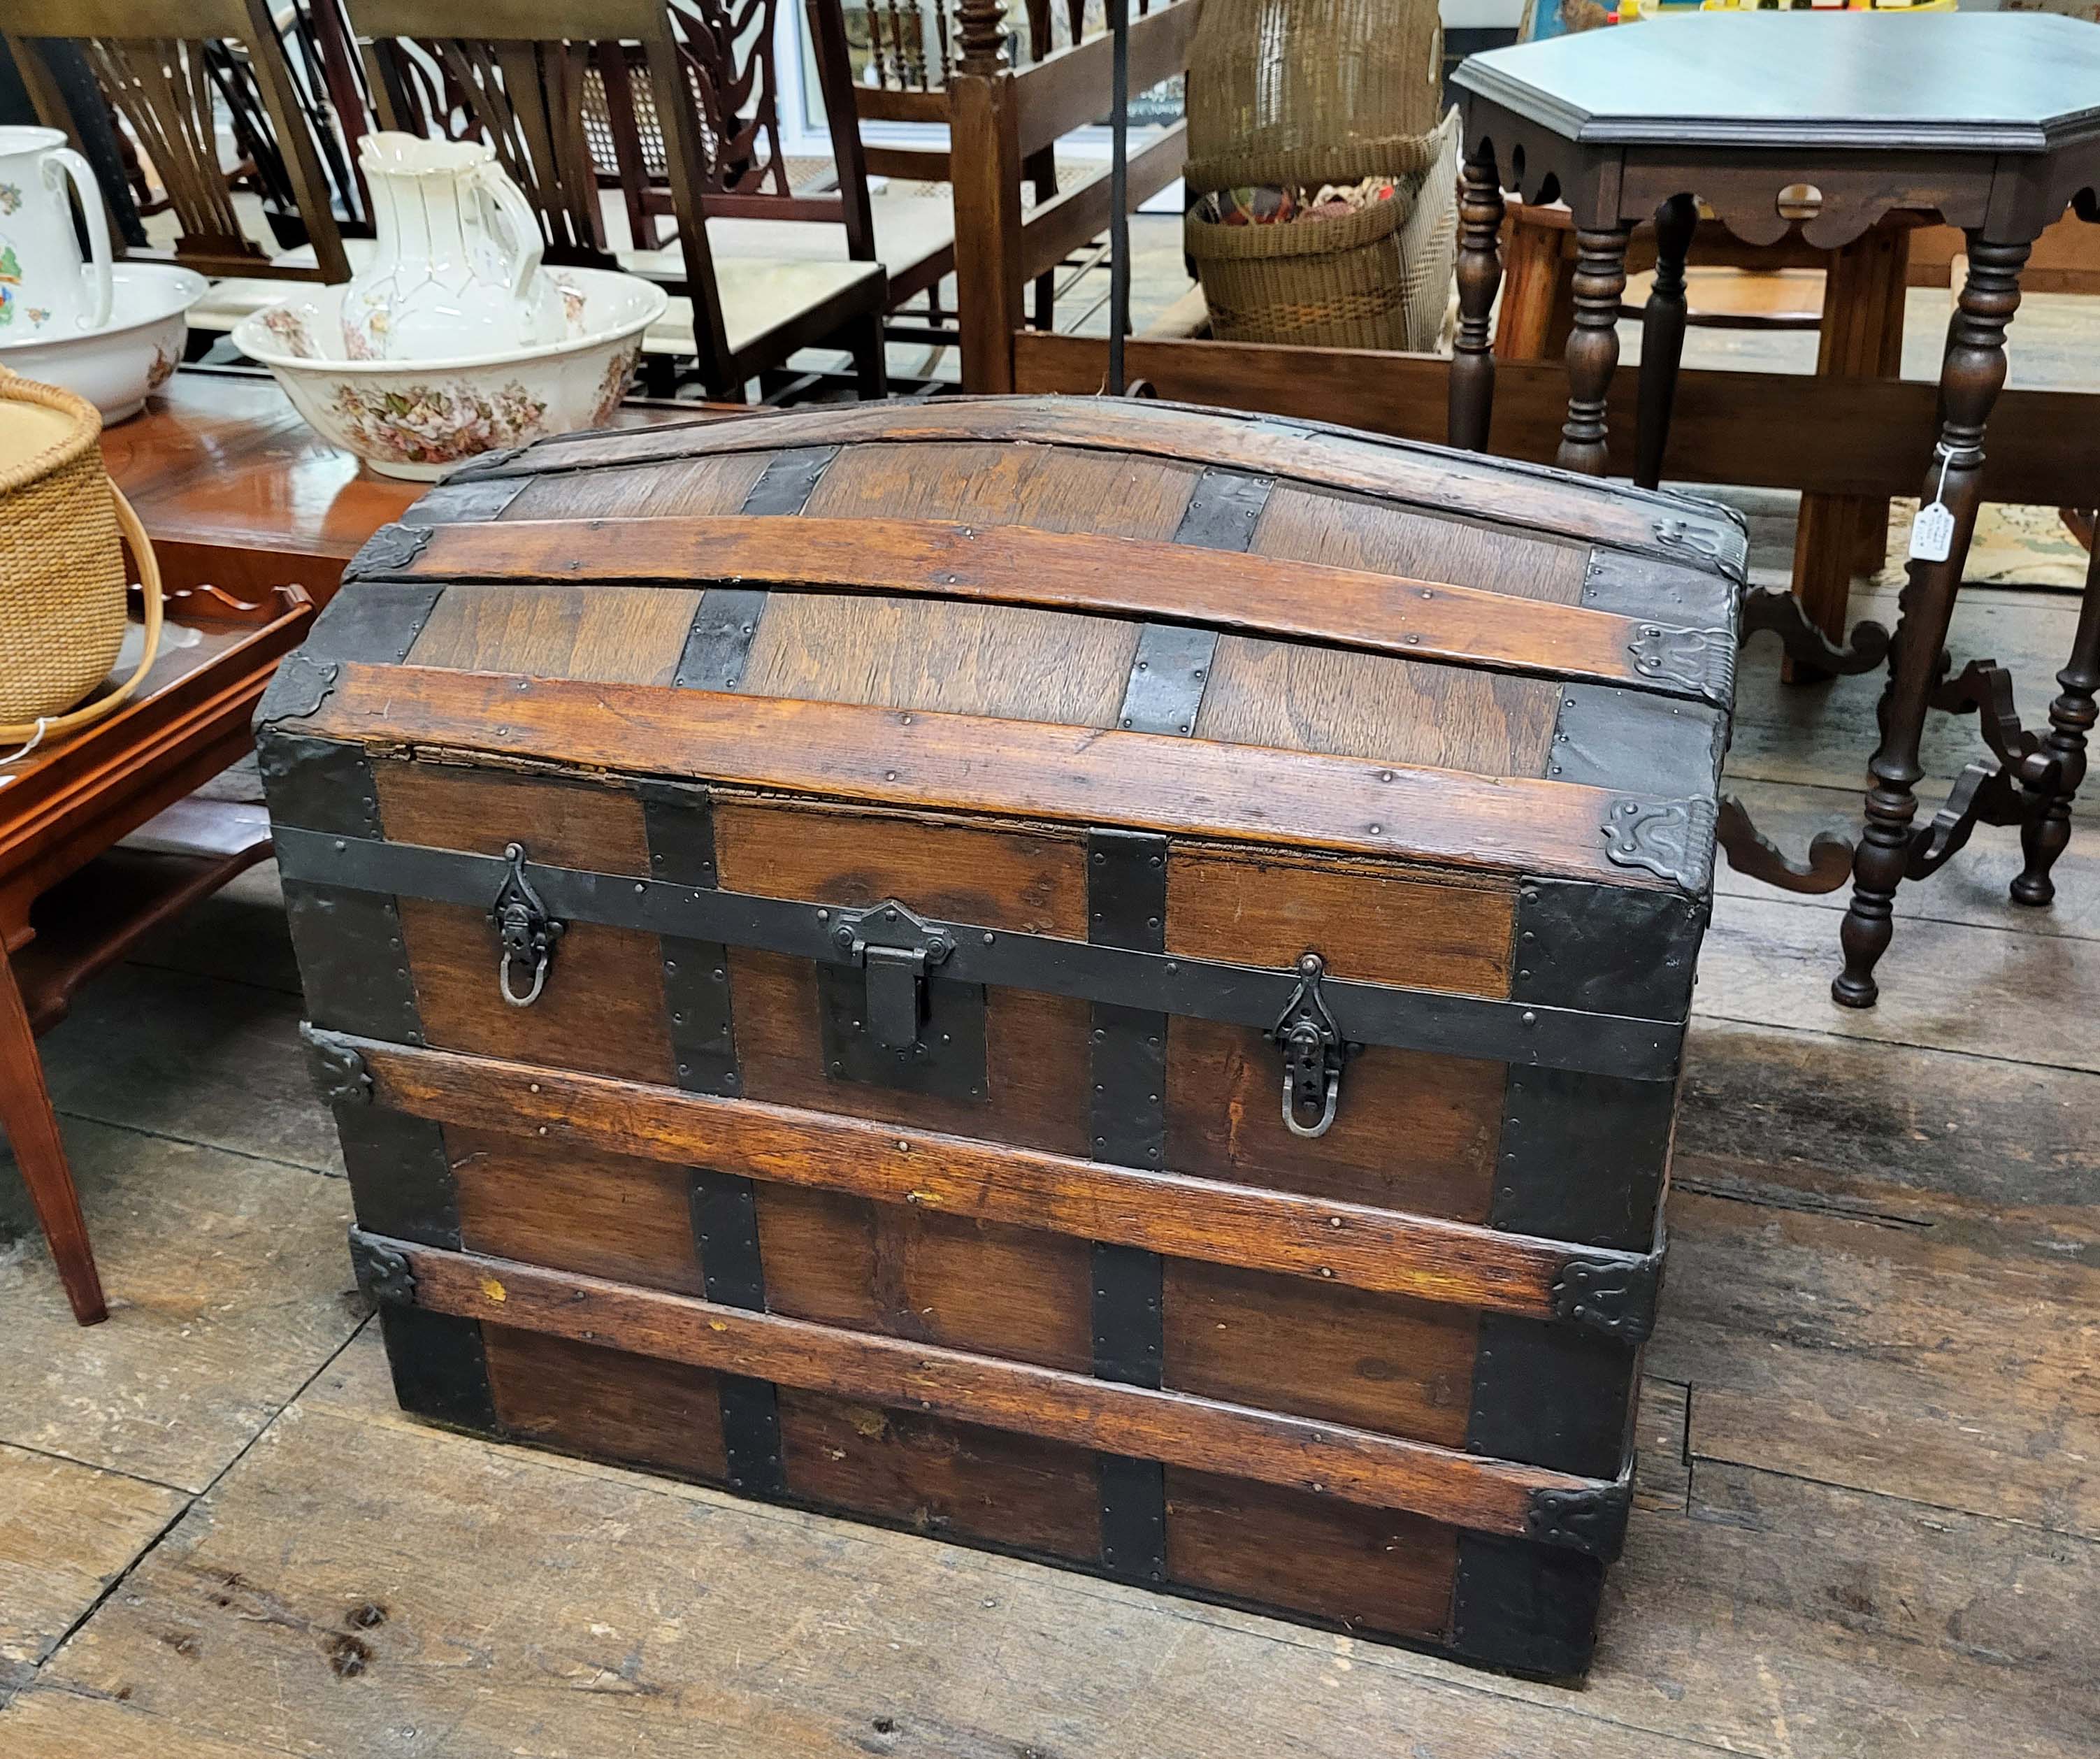 DOME TOP STEAMER TRUNK